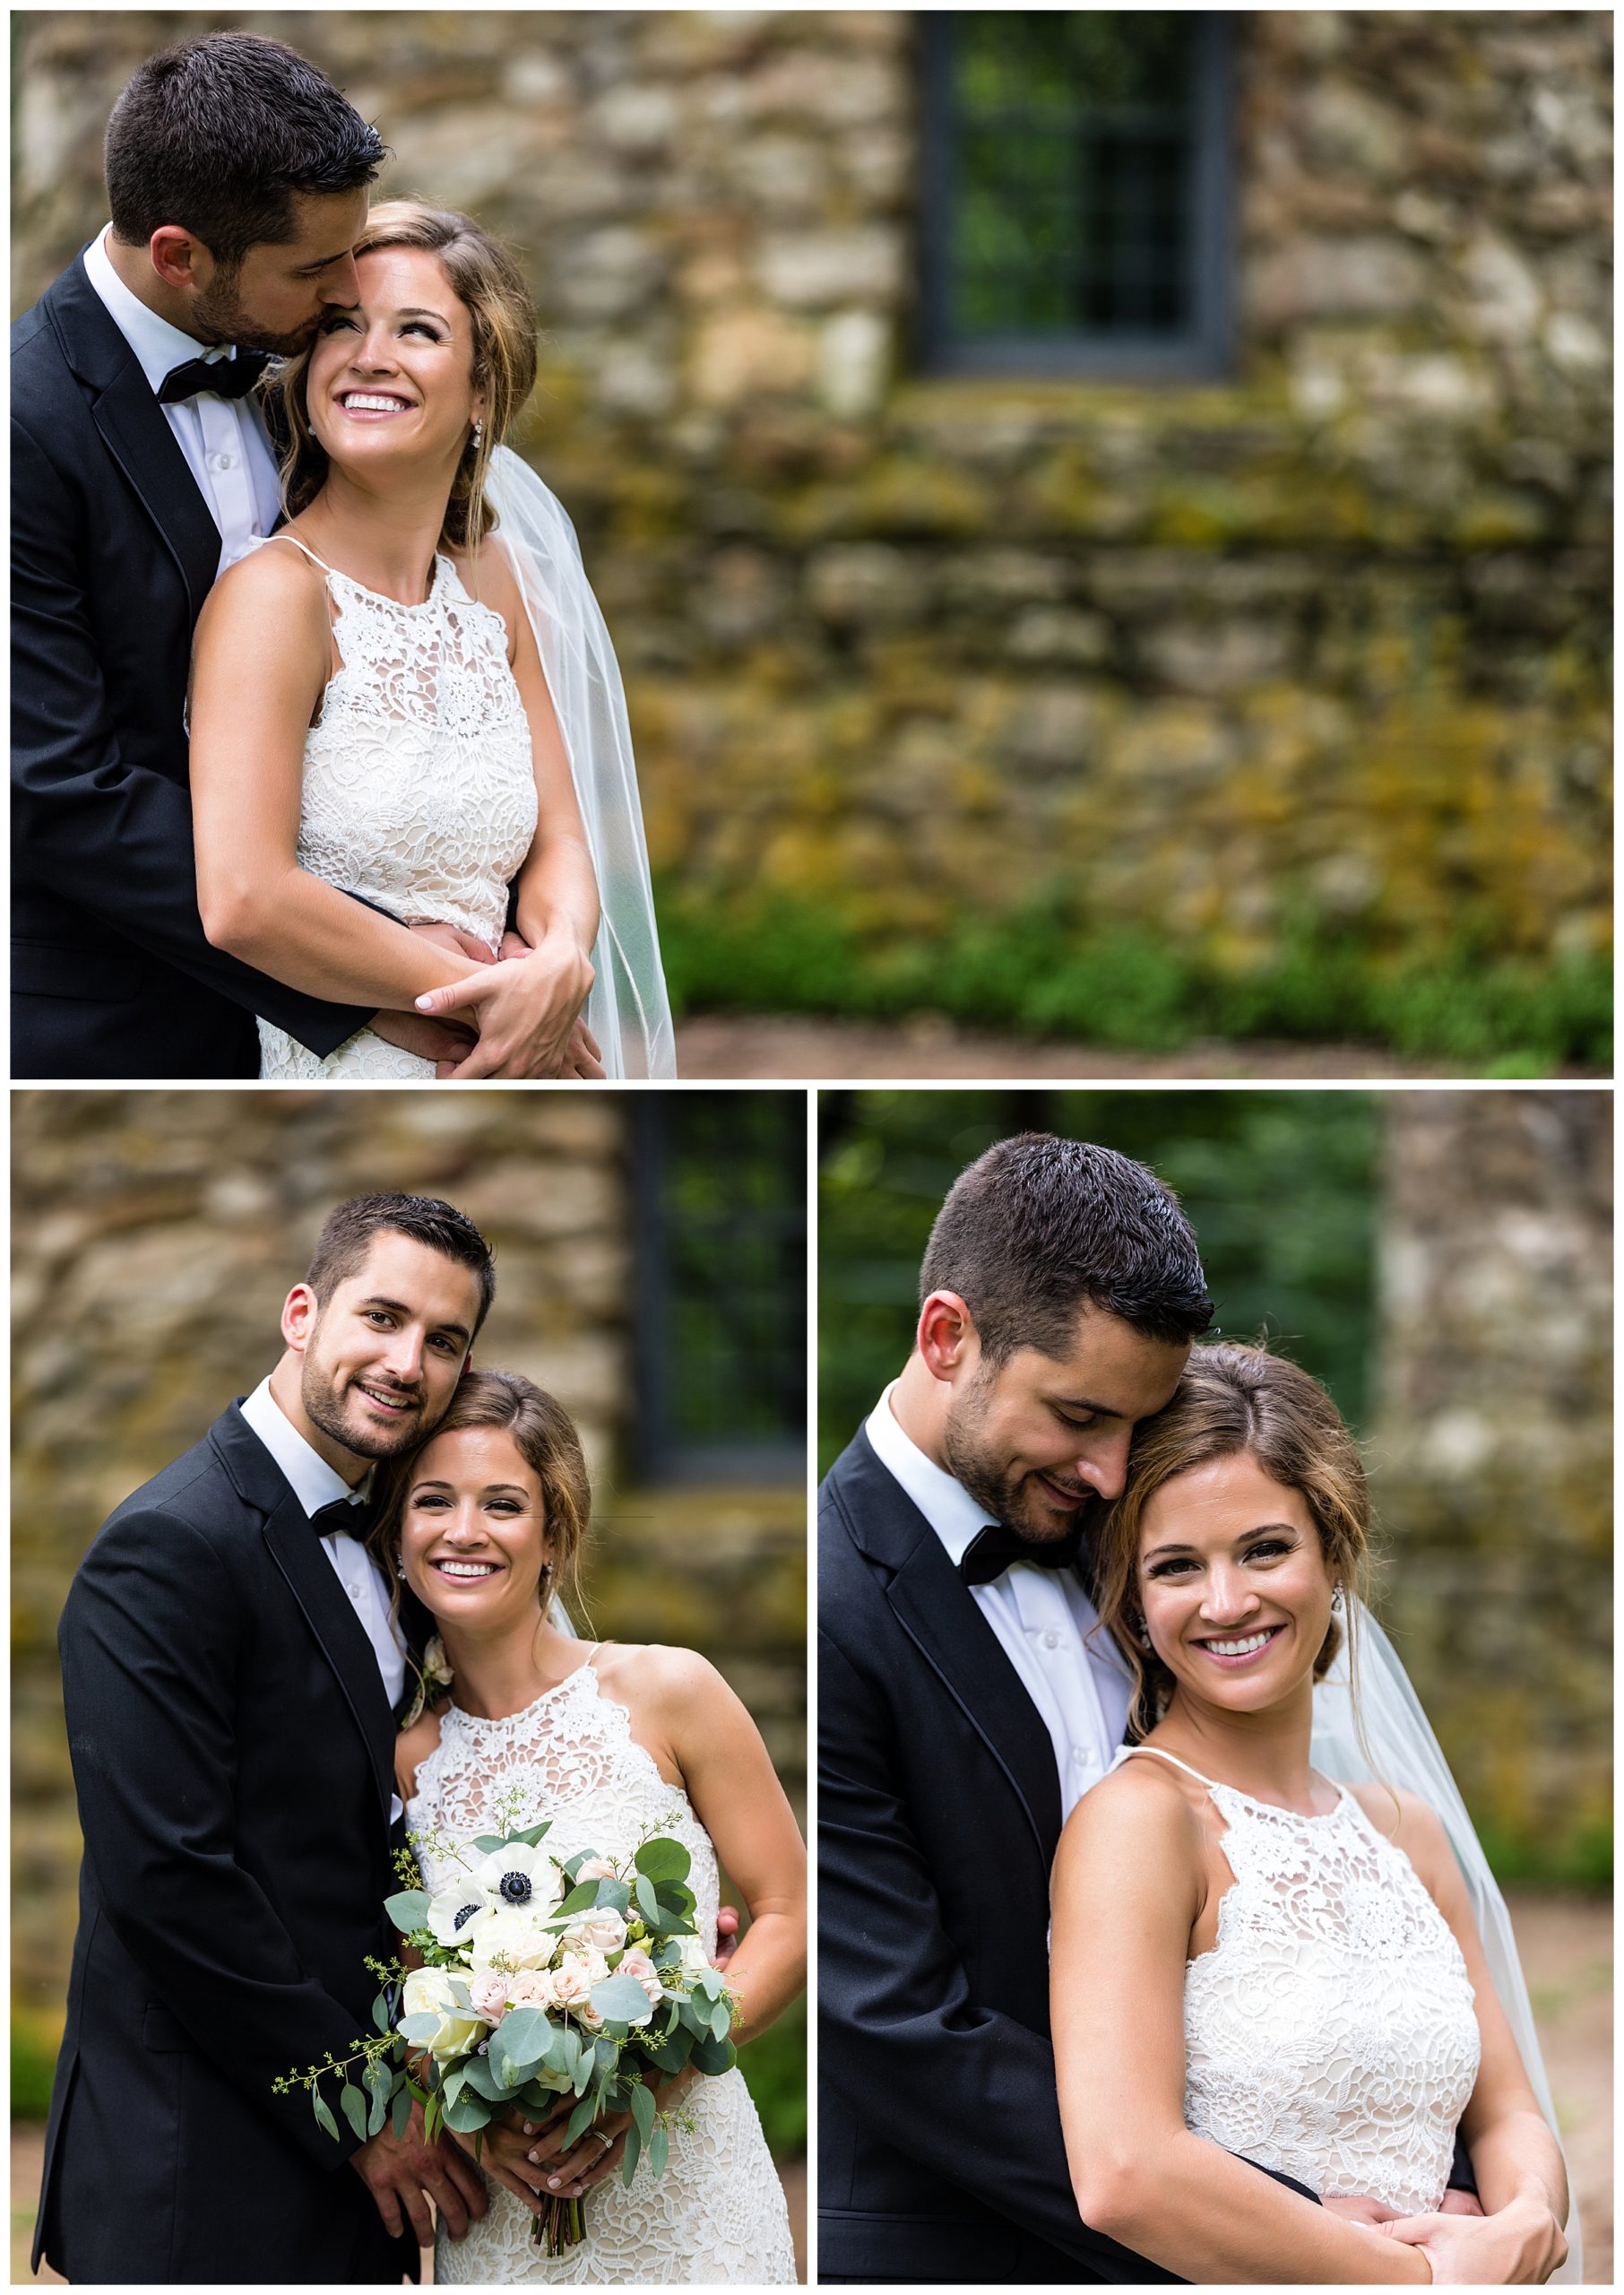 Romantic bride and groom portrait collage at the Olde Mill Inn